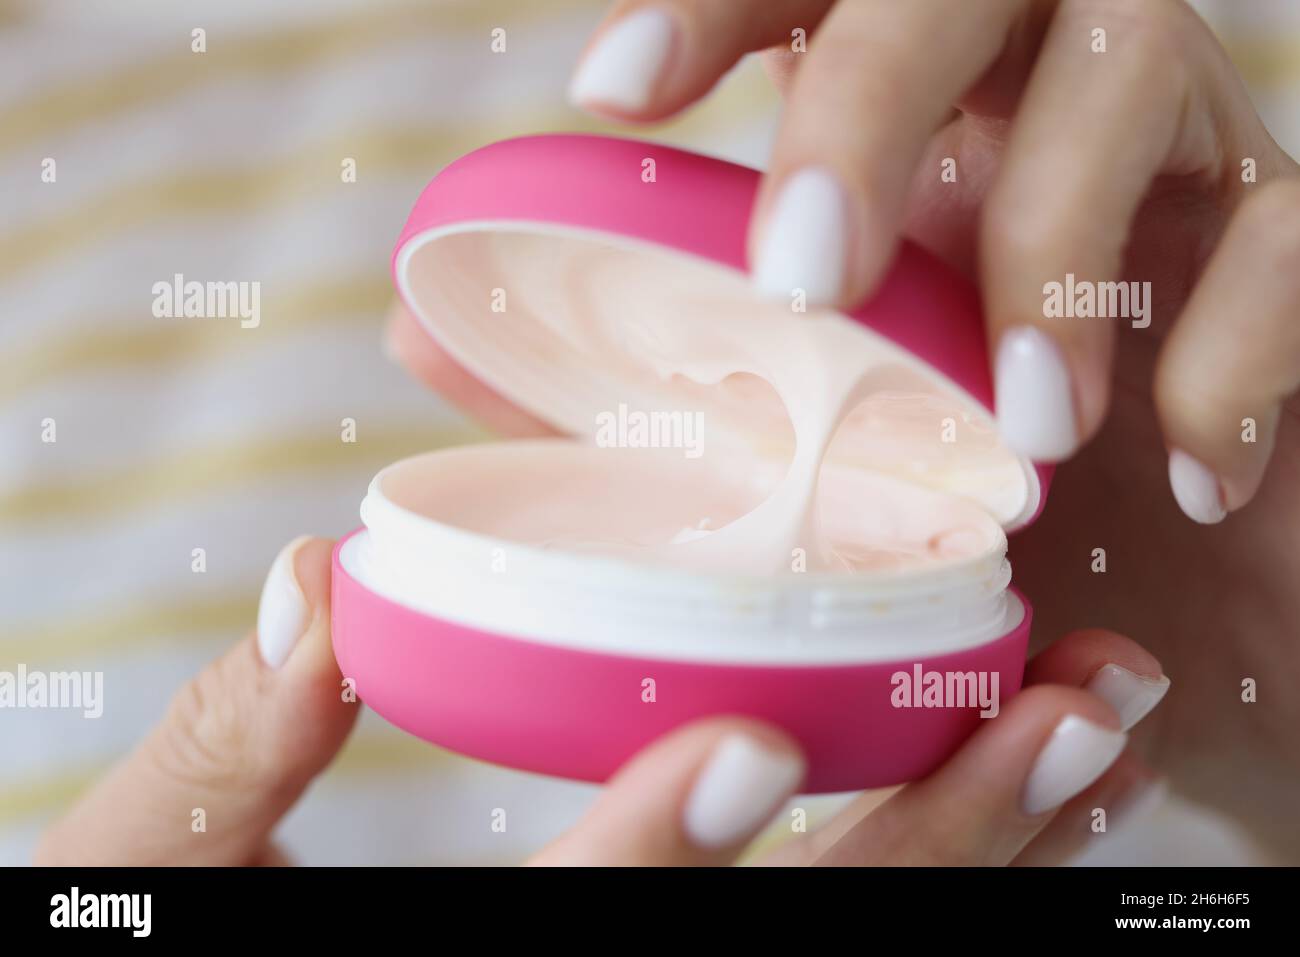 Lady open pink container with creamy texture inside for skin care Stock Photo